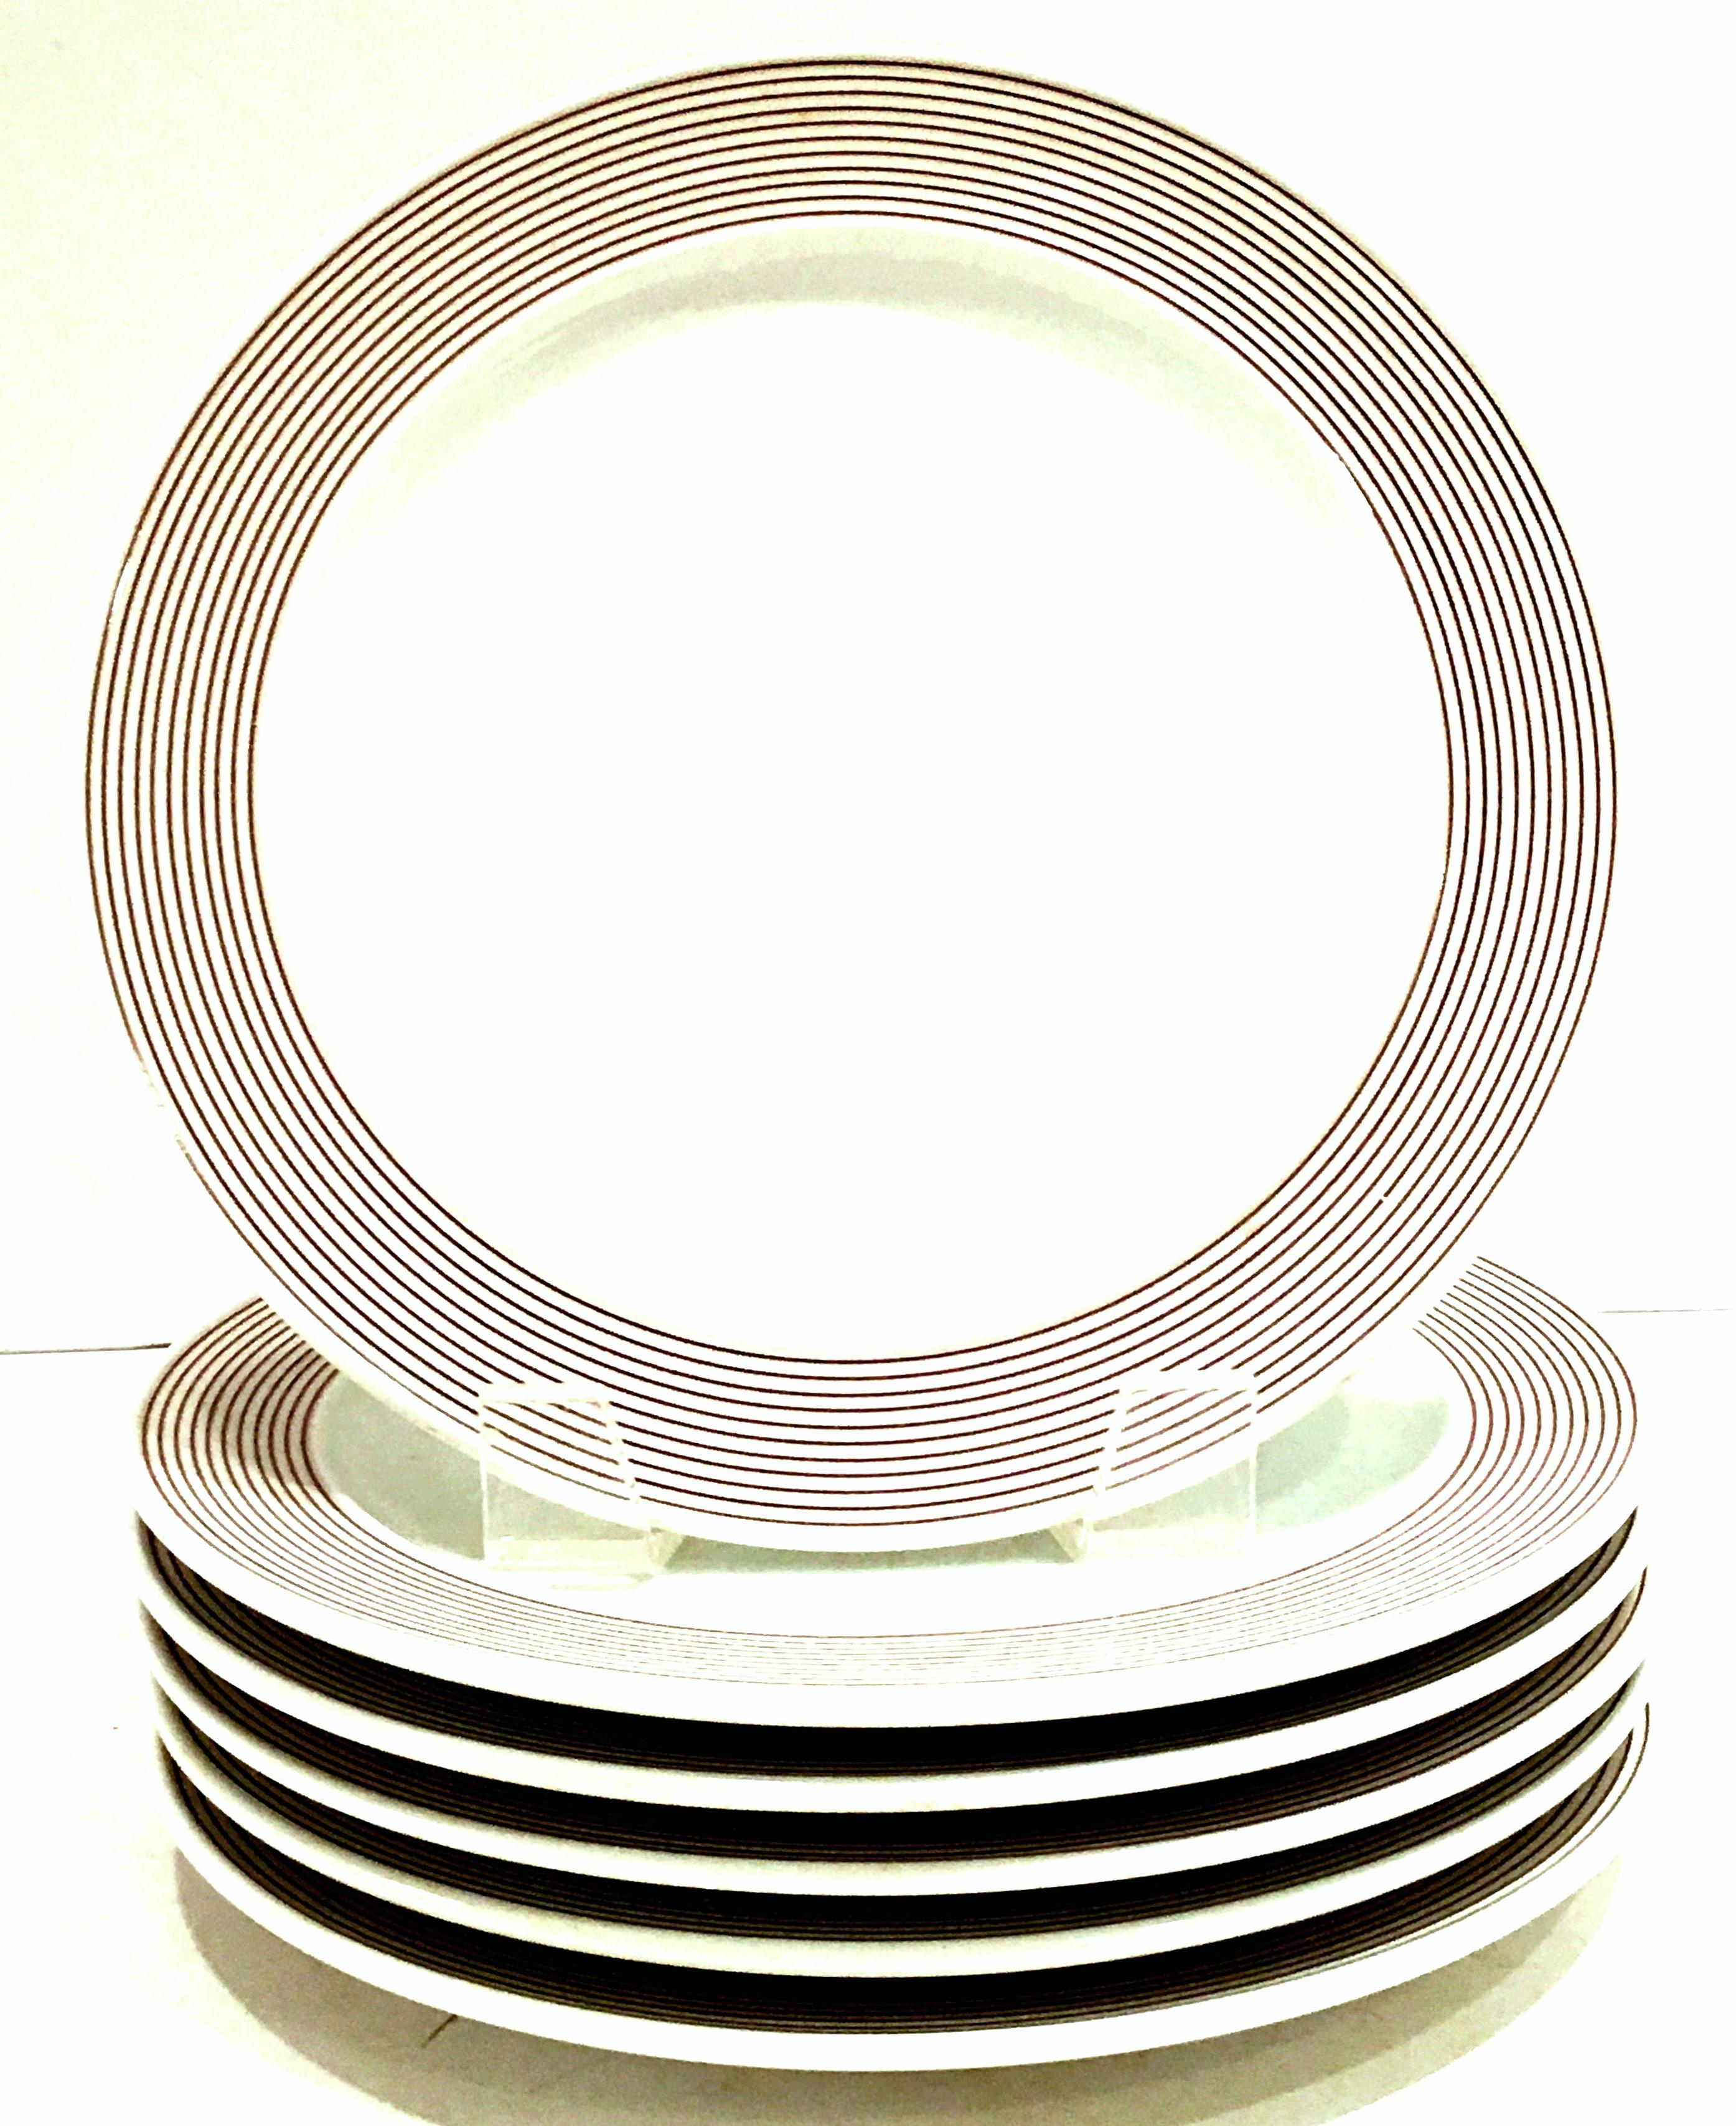 1970's Modern German porcelain dinnerware ‘Joy One’ set of 20 by, Rosenthal. Pattern features a modern and clean lined white ground with brown rings/stripes detail.
Set includes, 4 dinner plates, 10.5 diameter, 6 bread/butter plates, 6.50